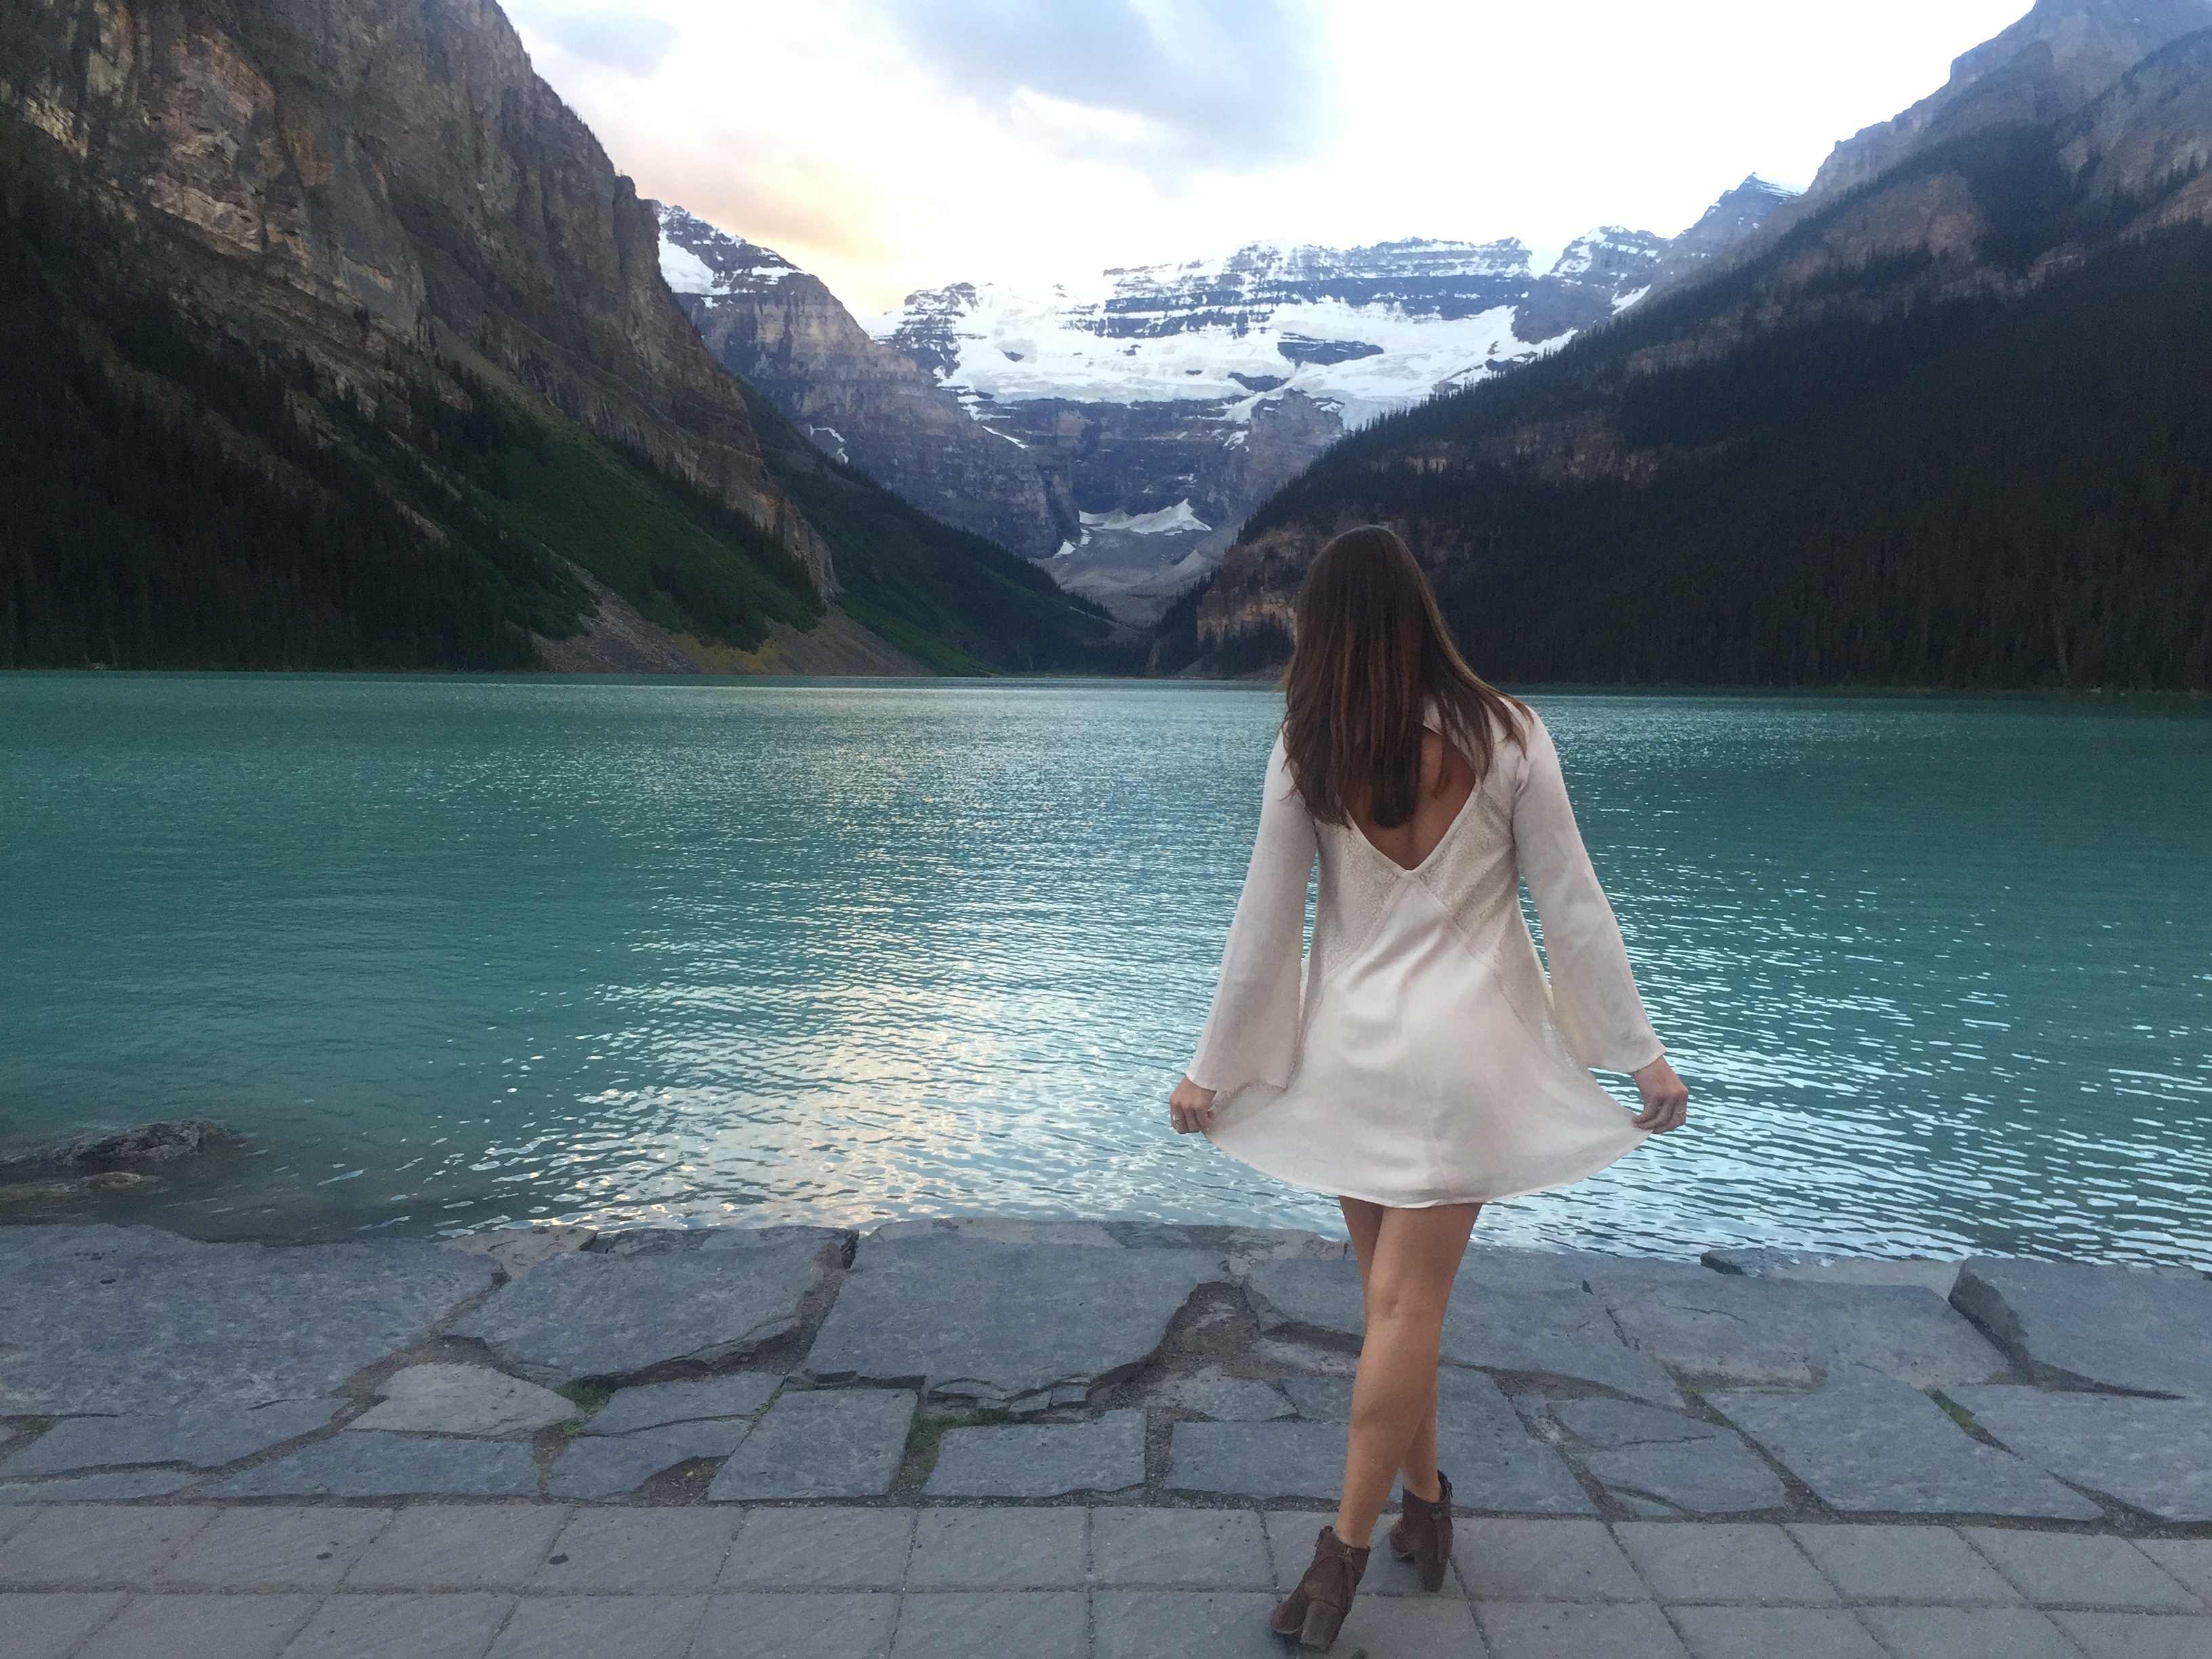 Insider tips to making the most of your trip to Banff National Park in Alberta, Canada.